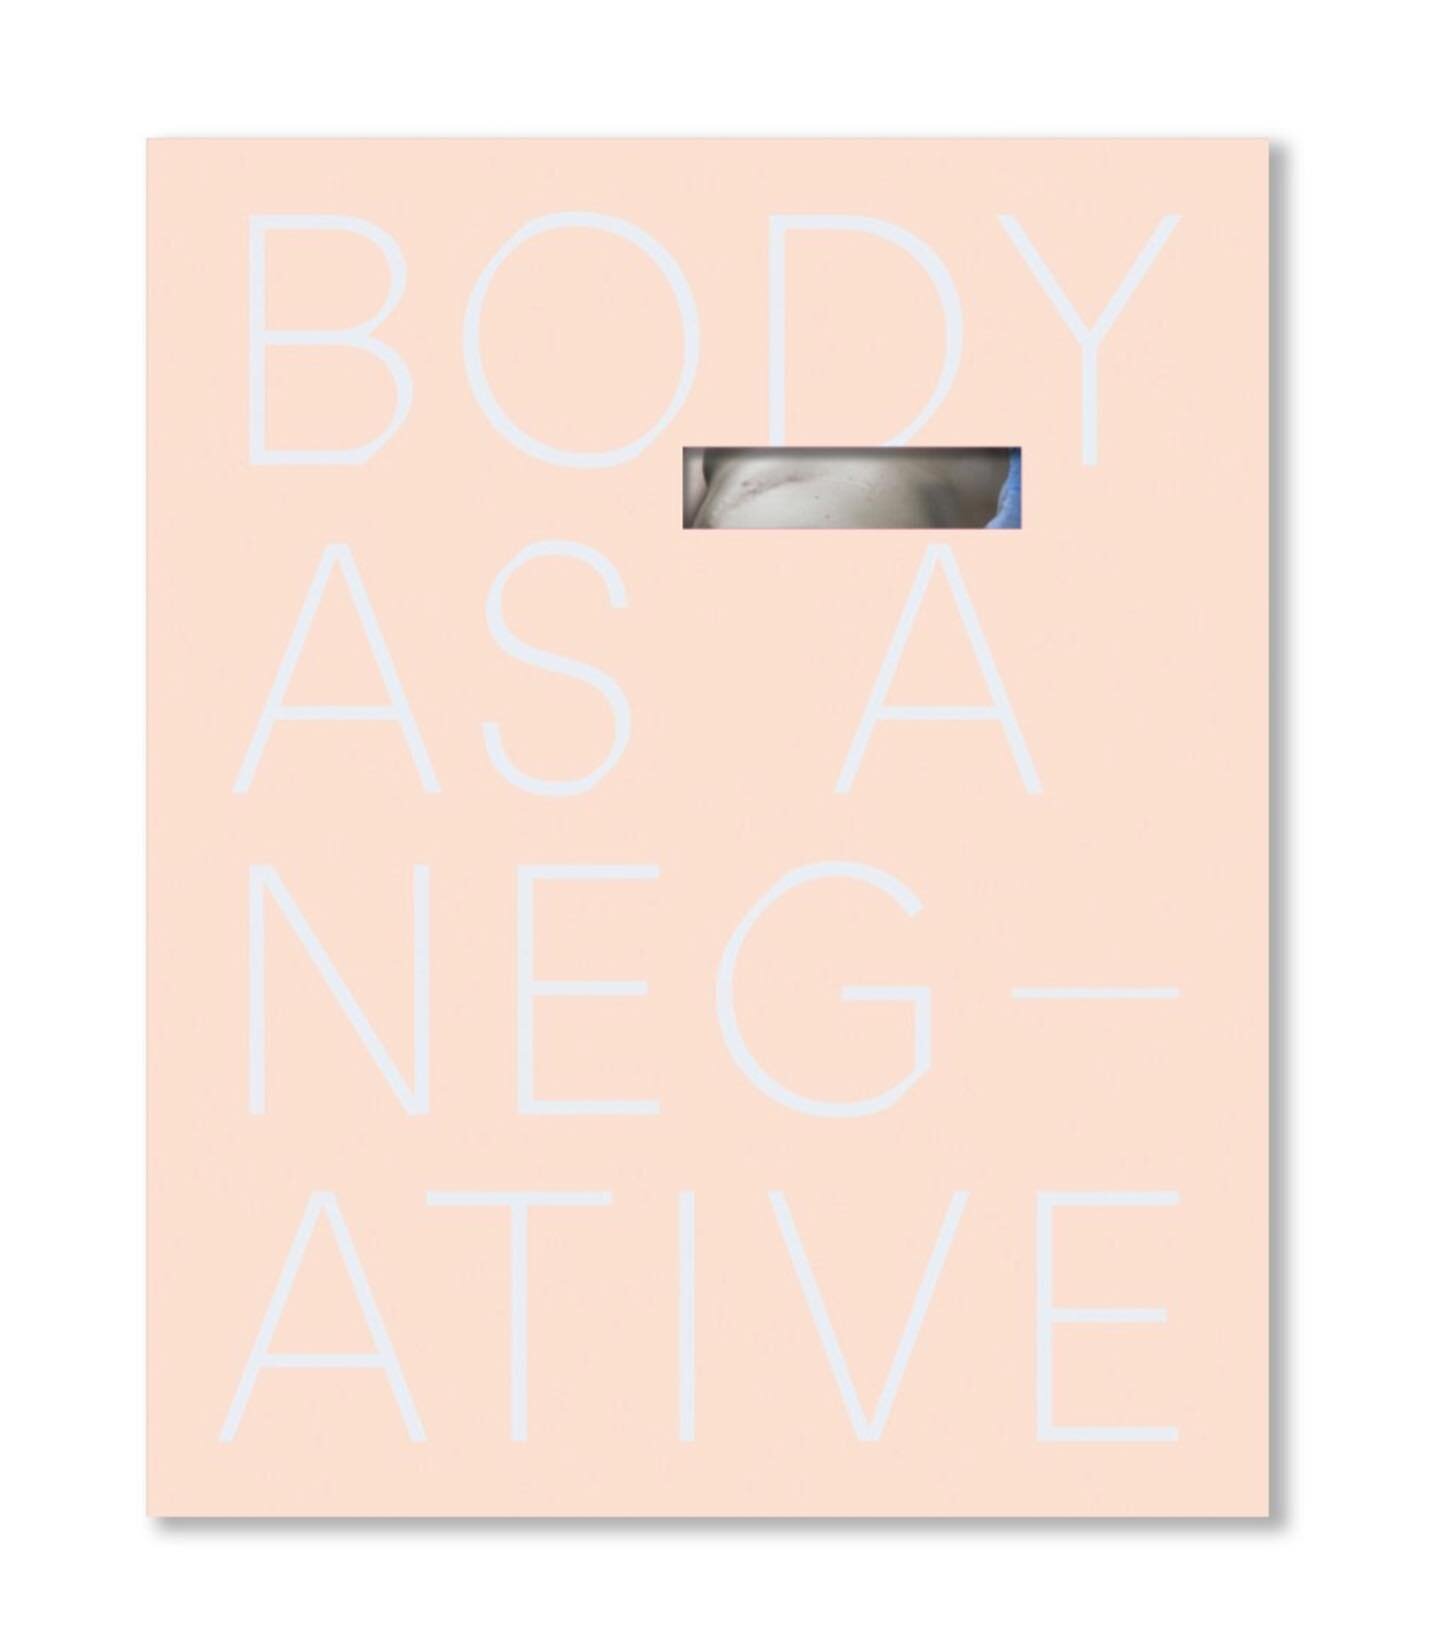 Just released: Body As a Negative by Izabela Jurcewicz

In this work Izabela Jurcewicz deals with traumatic memories written in the body on a cellular level. She was an inter-organ tumor patient, one of 300 cases worldwide, where science had few answ